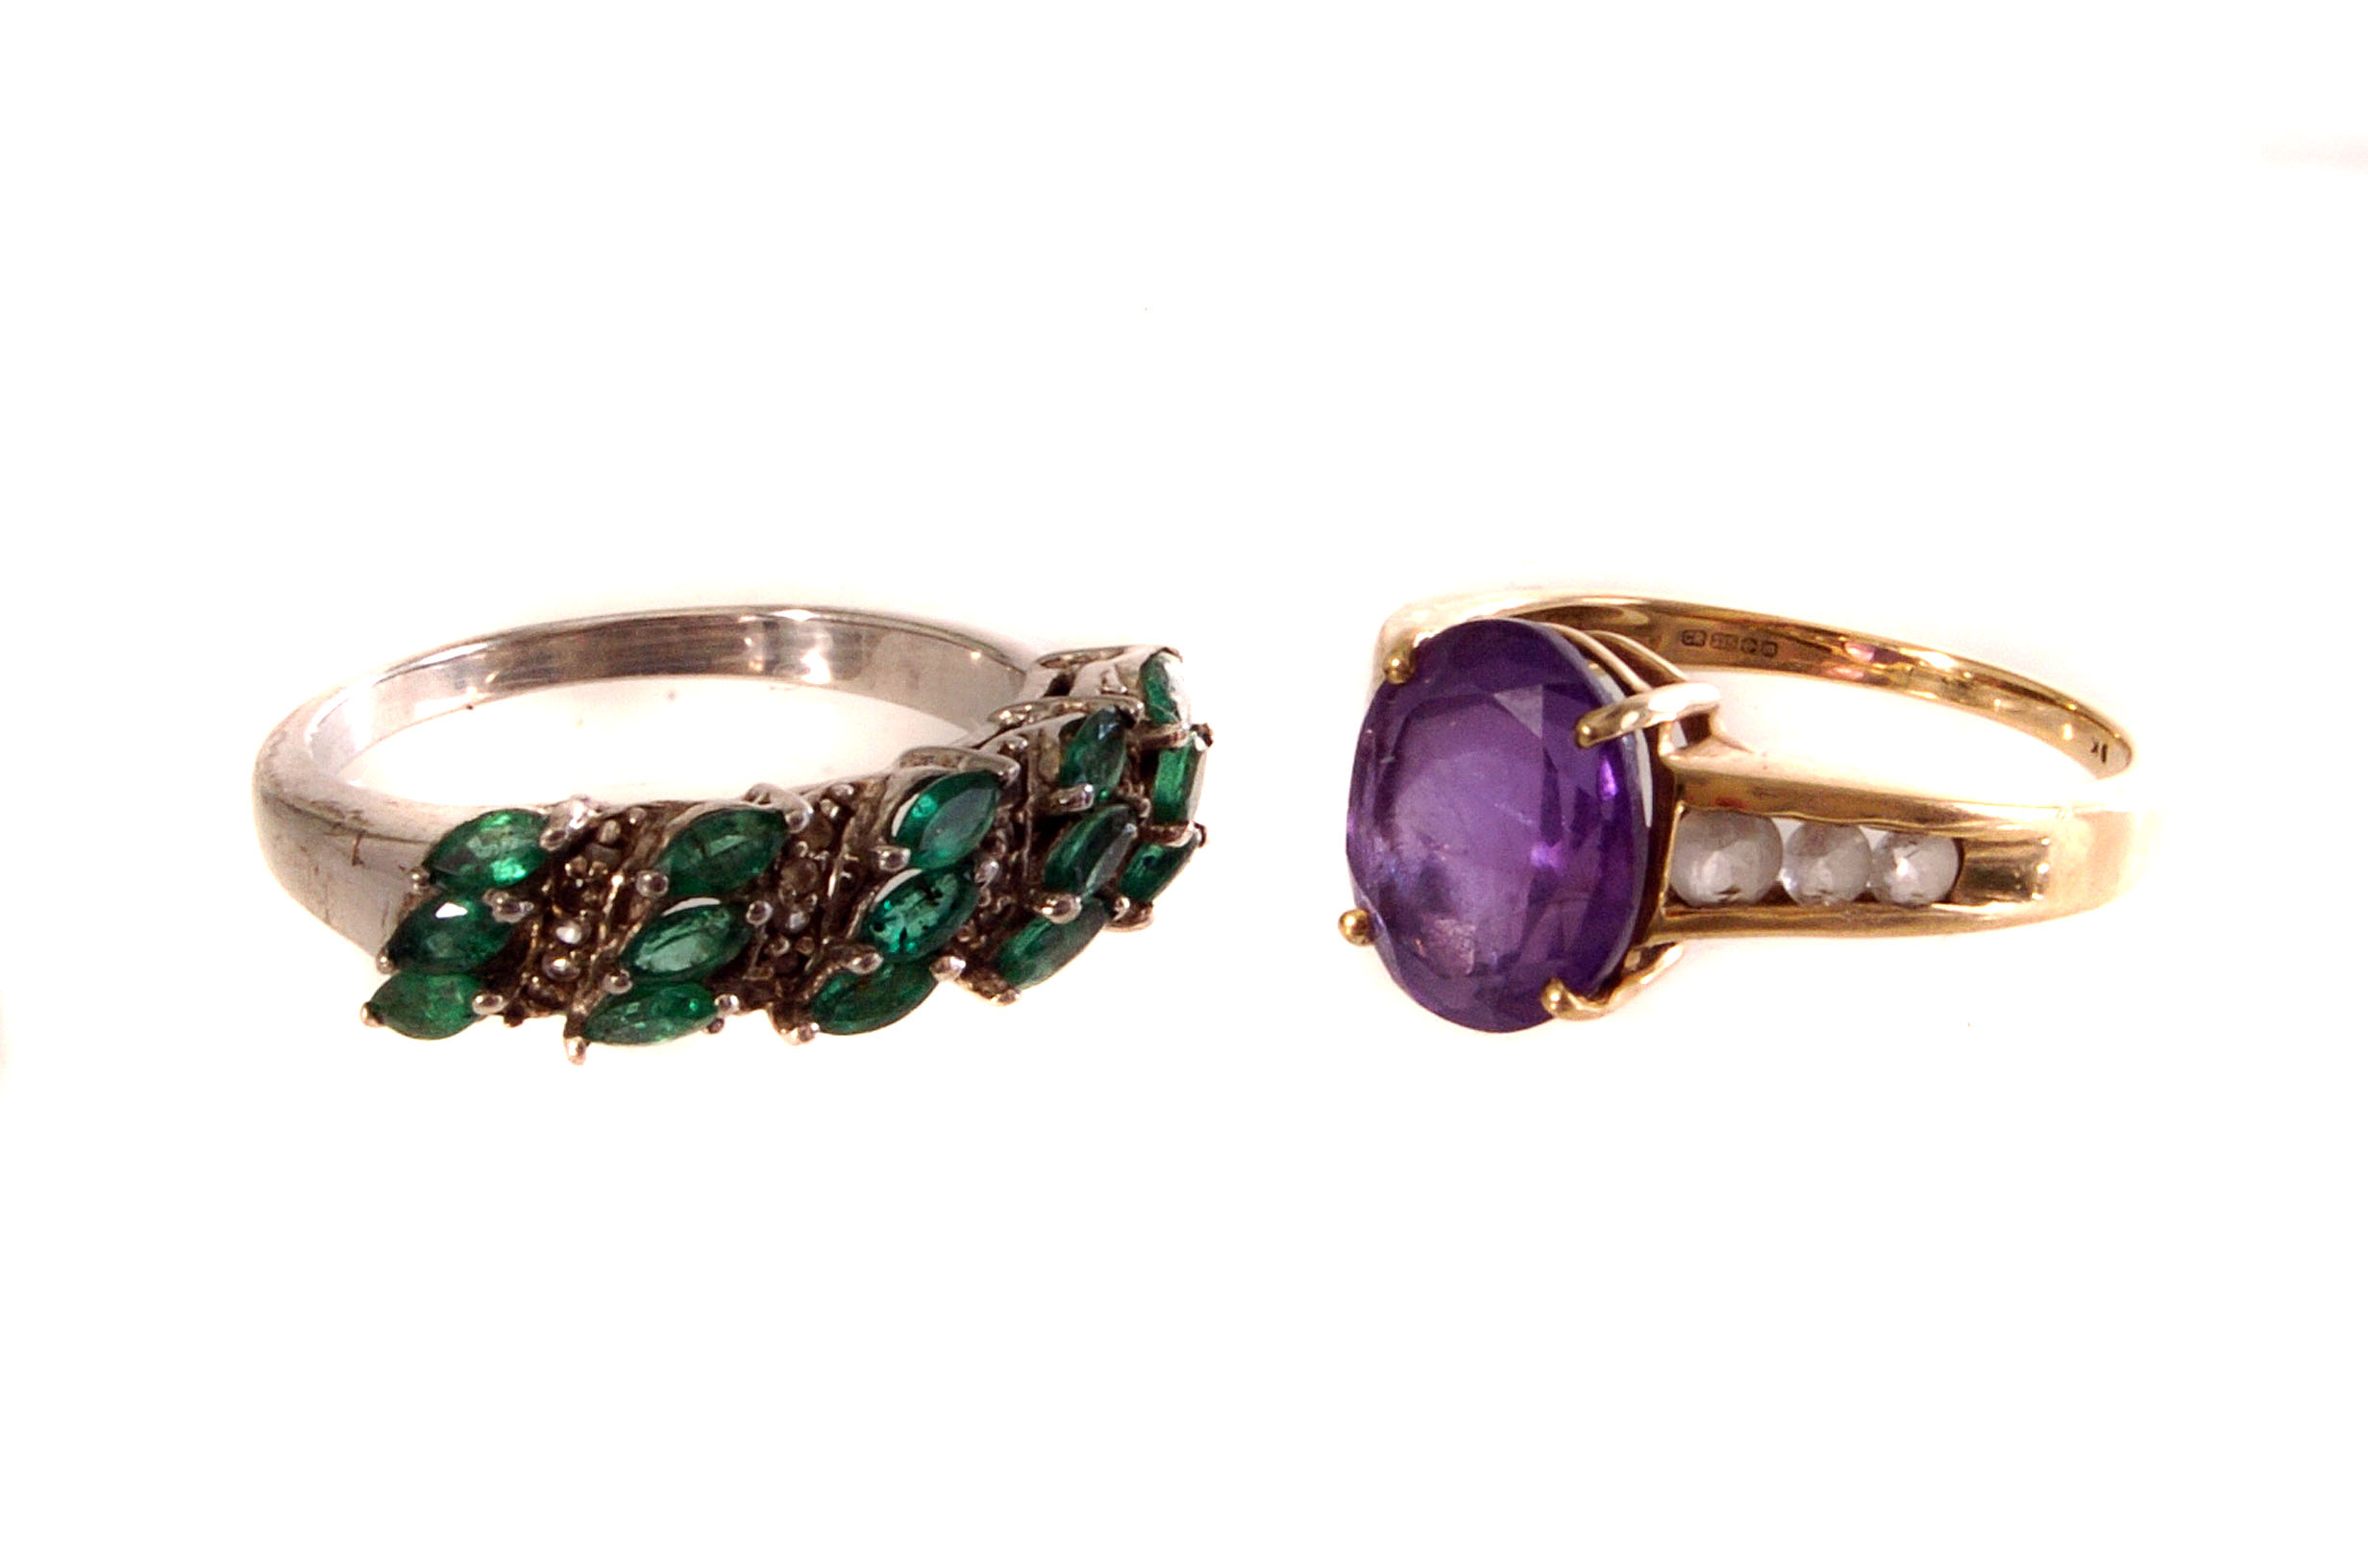 A 9ct gold amethyst and topaz dress ring, together with a silver emerald and topaz ring, both in